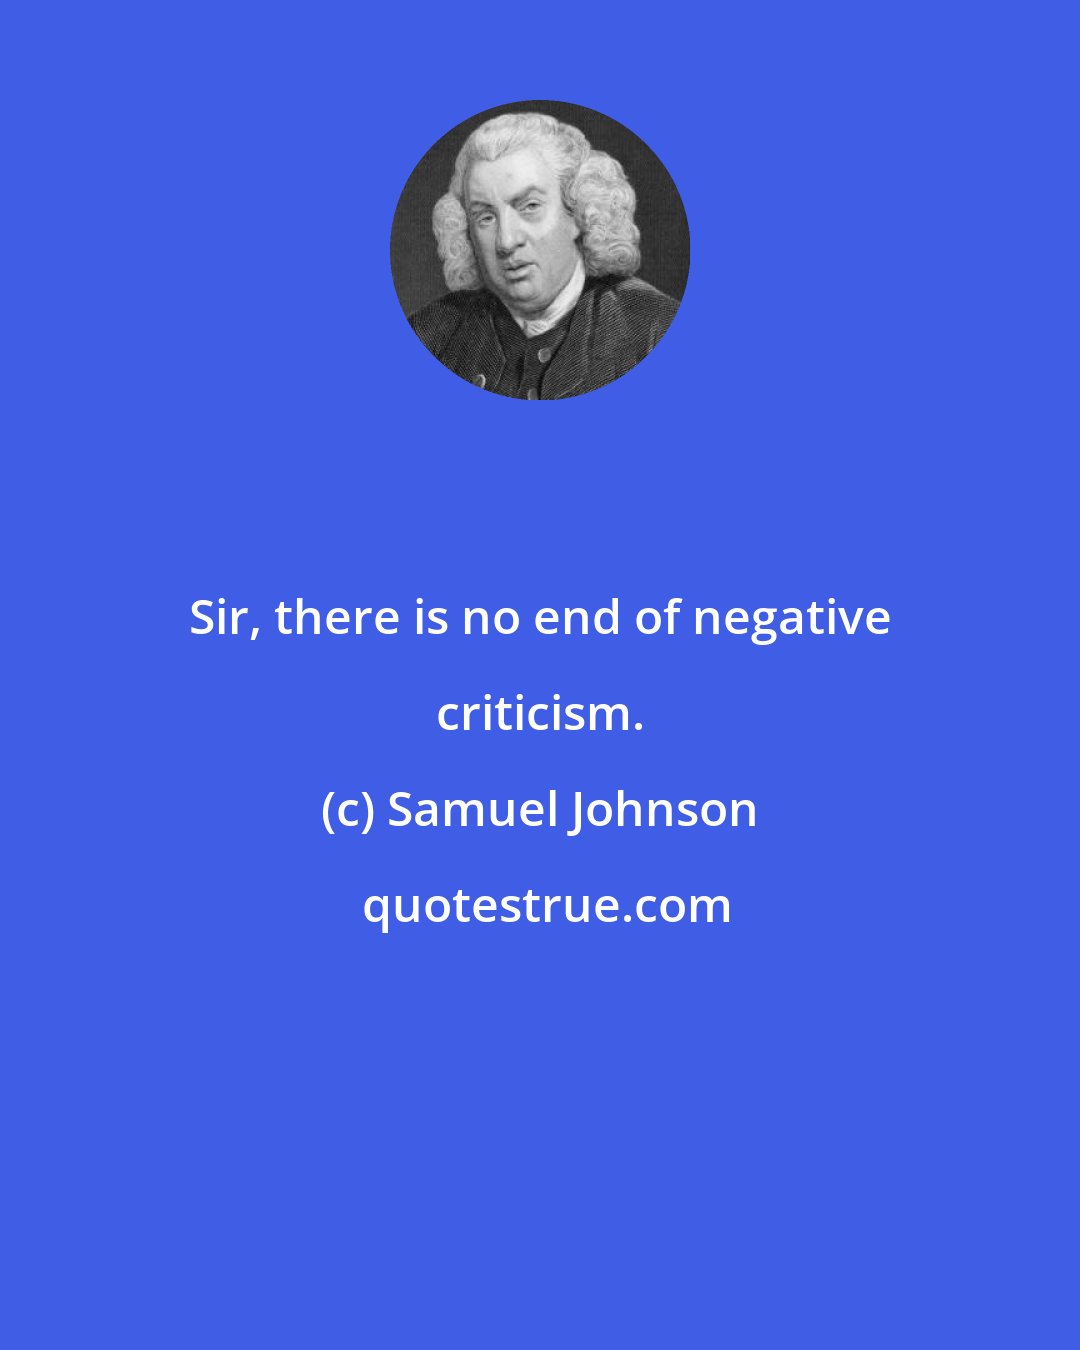 Samuel Johnson: Sir, there is no end of negative criticism.